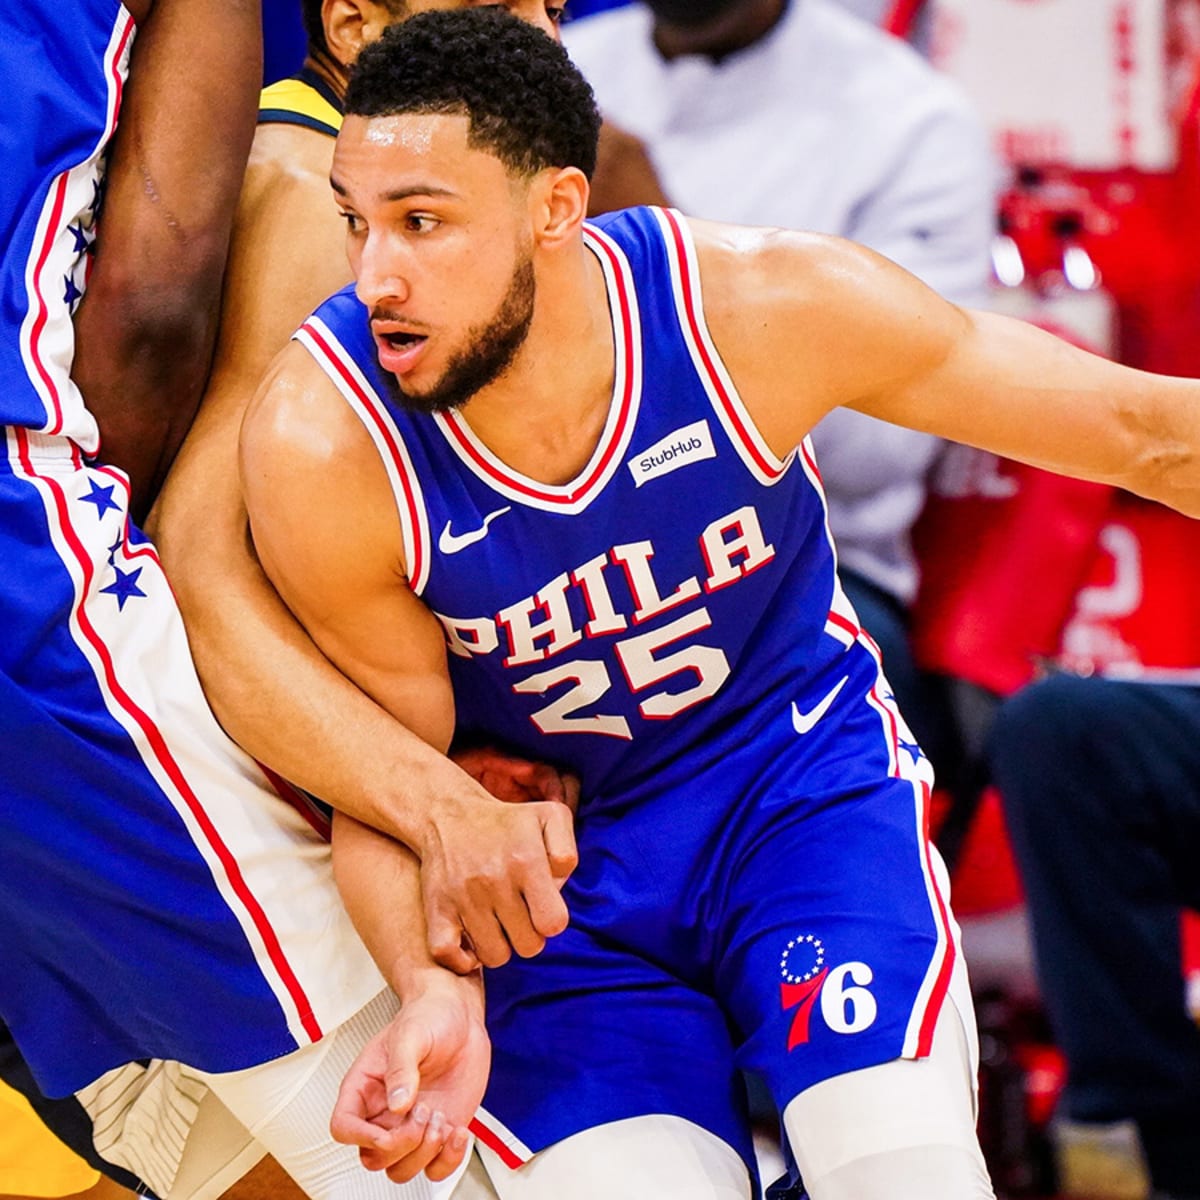 Sixers' Ben Simmons makes first career three-pointer - The